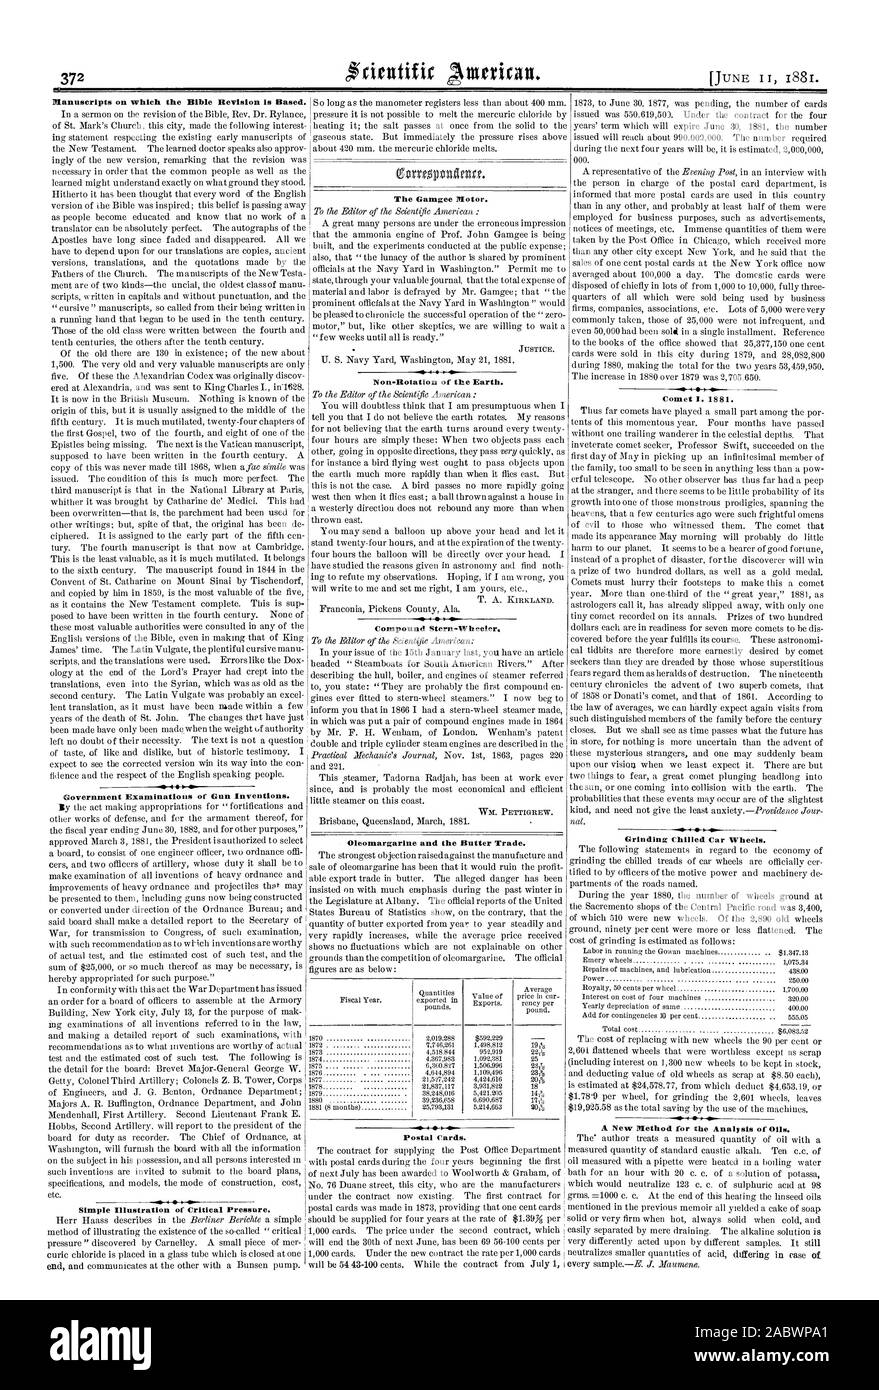 Manuscripts on which the Bible Revision is Based. Government Examinations of Gun Inventions. Simple Illustration of Critical Pressure. Comet I. 1881. Grinding Chilled Car Wheels. A New Method for the Analysis of Oils. The Gamgee Motor. Non-Rotation of the Earth. Compound Stern-Wheeler Oleomargarine and the Butter Trade., scientific american, 1881-06-11 Stock Photo